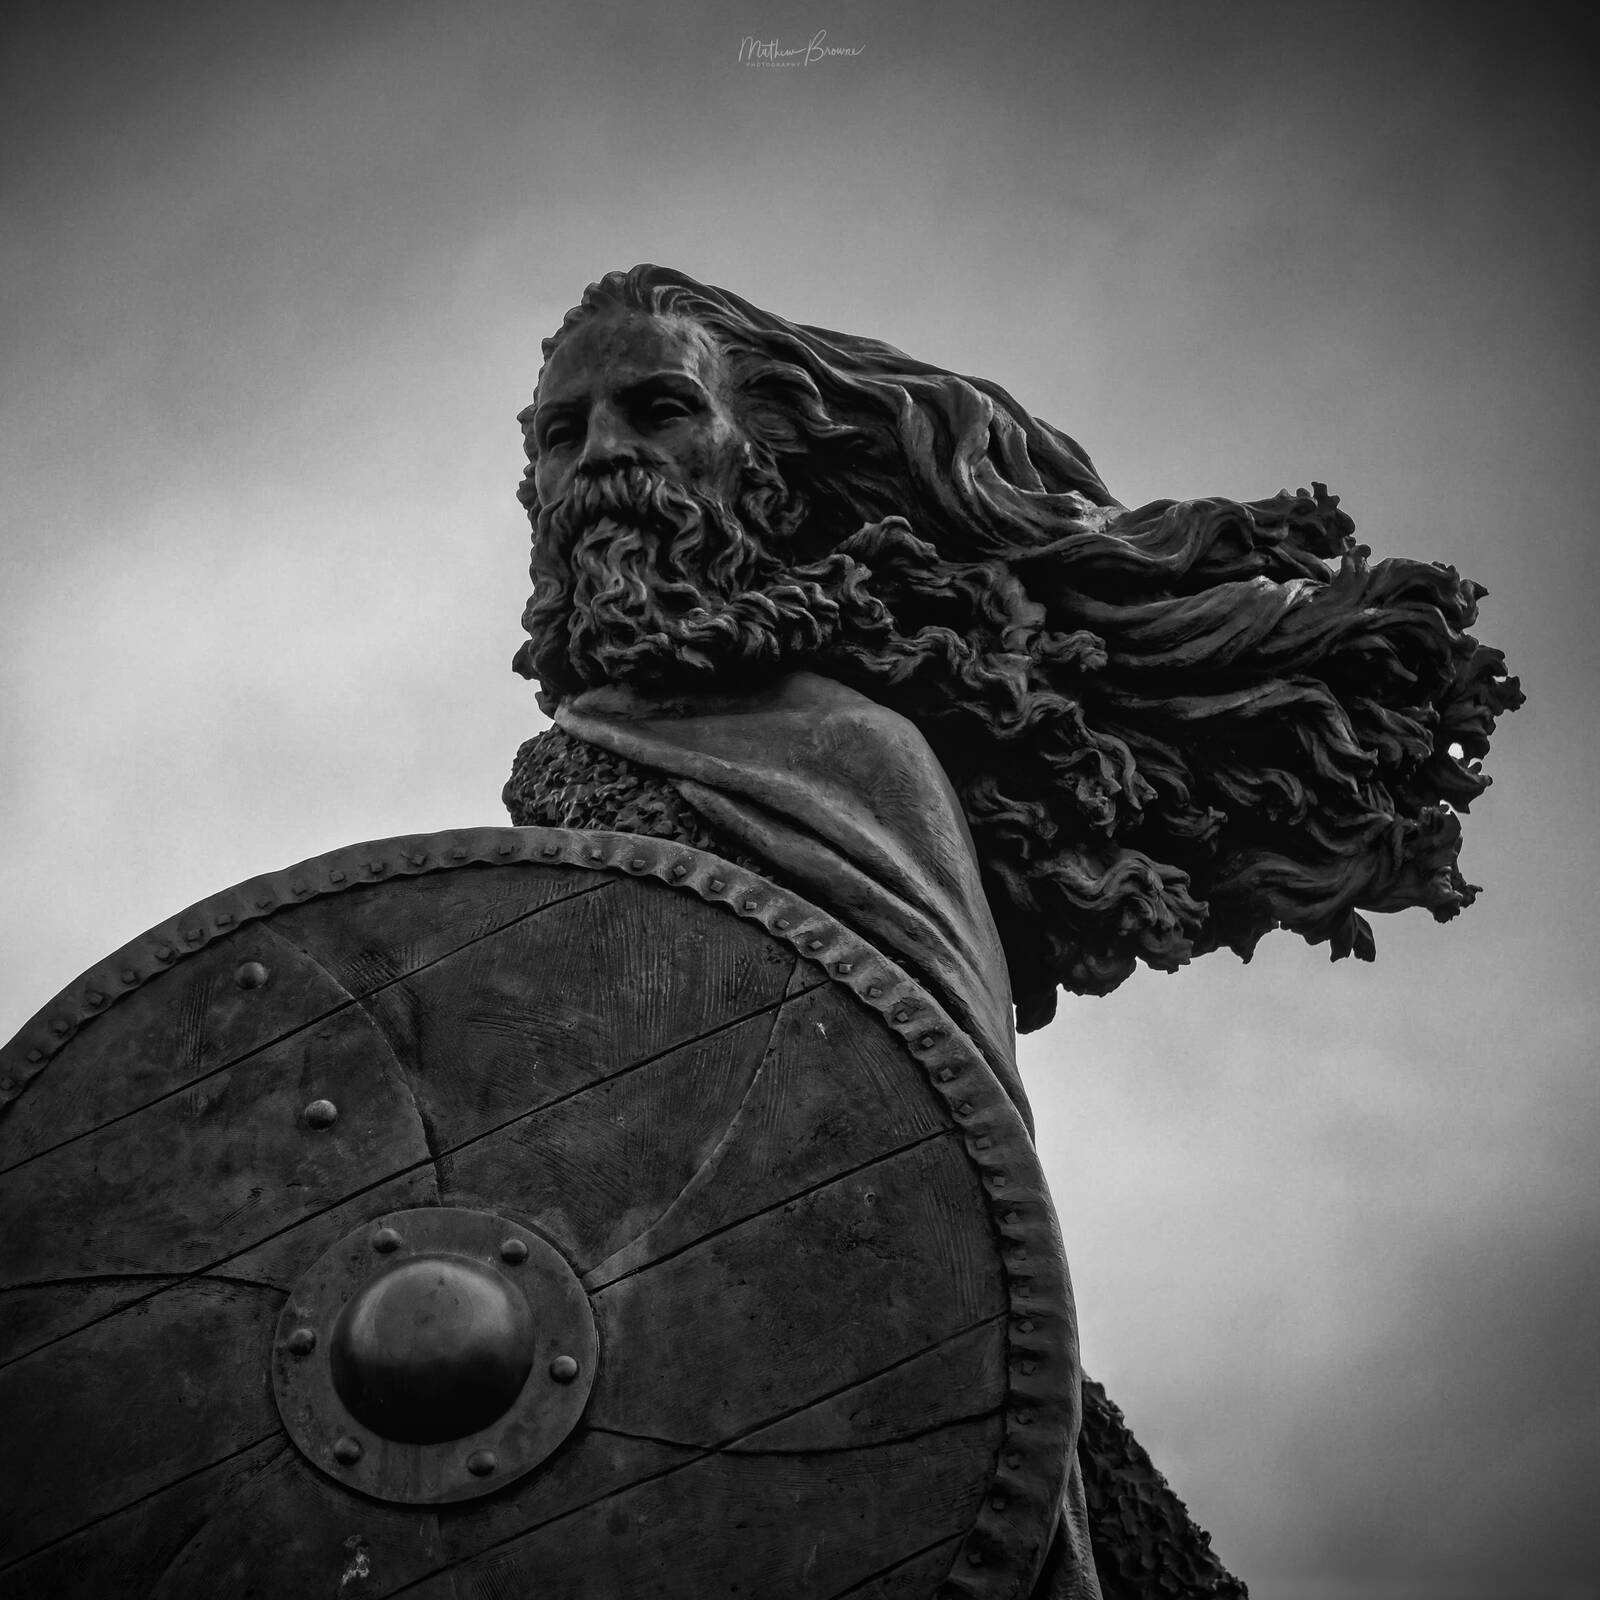 Image of King Harald I Fairhair Statue by Mathew Browne